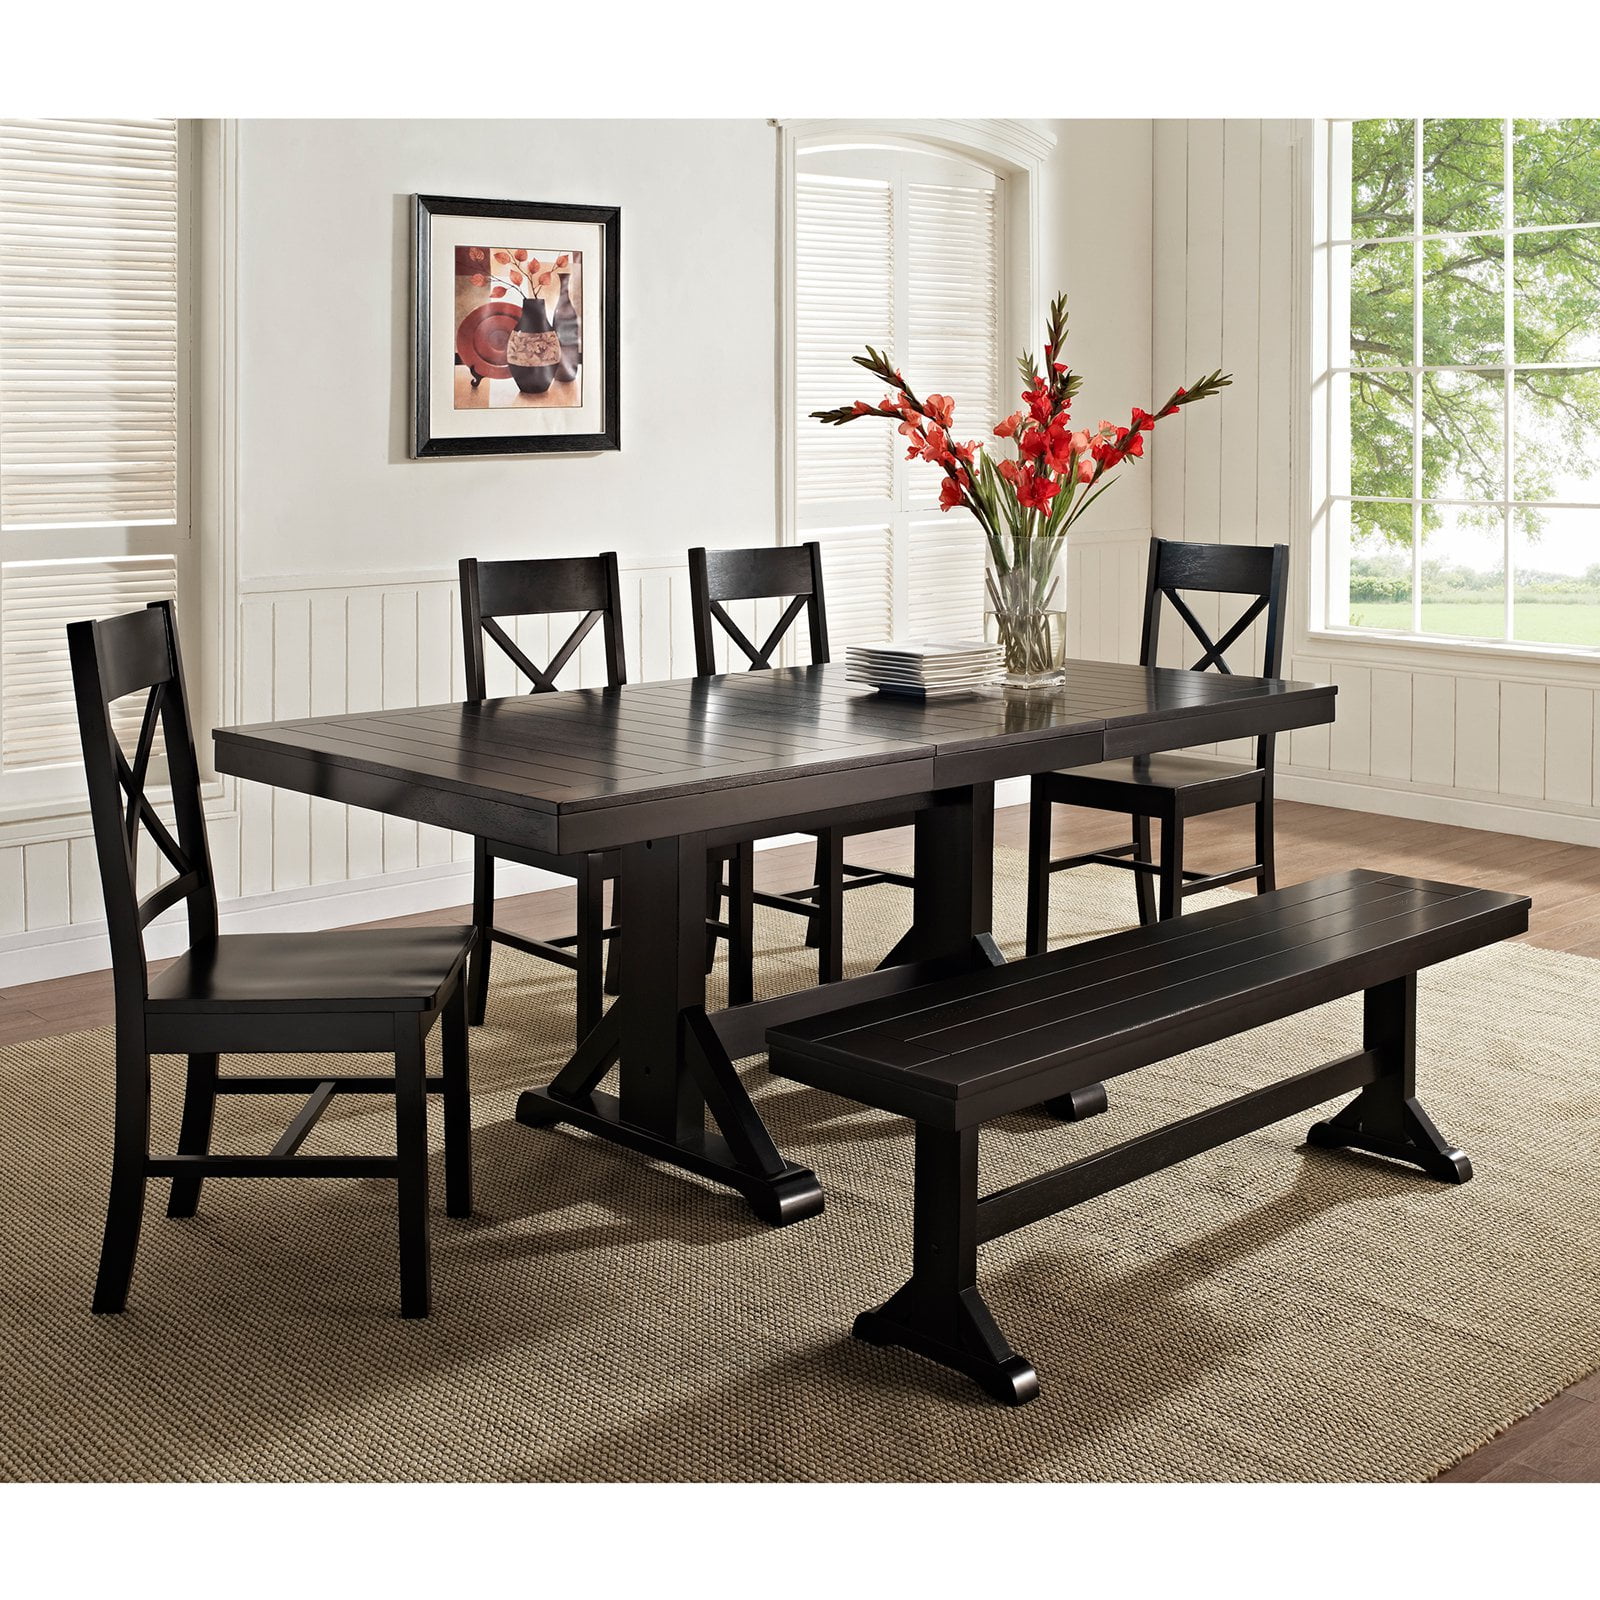 Solid Wood Dining Set With Bench, 6 Piece Black Dining Room Set